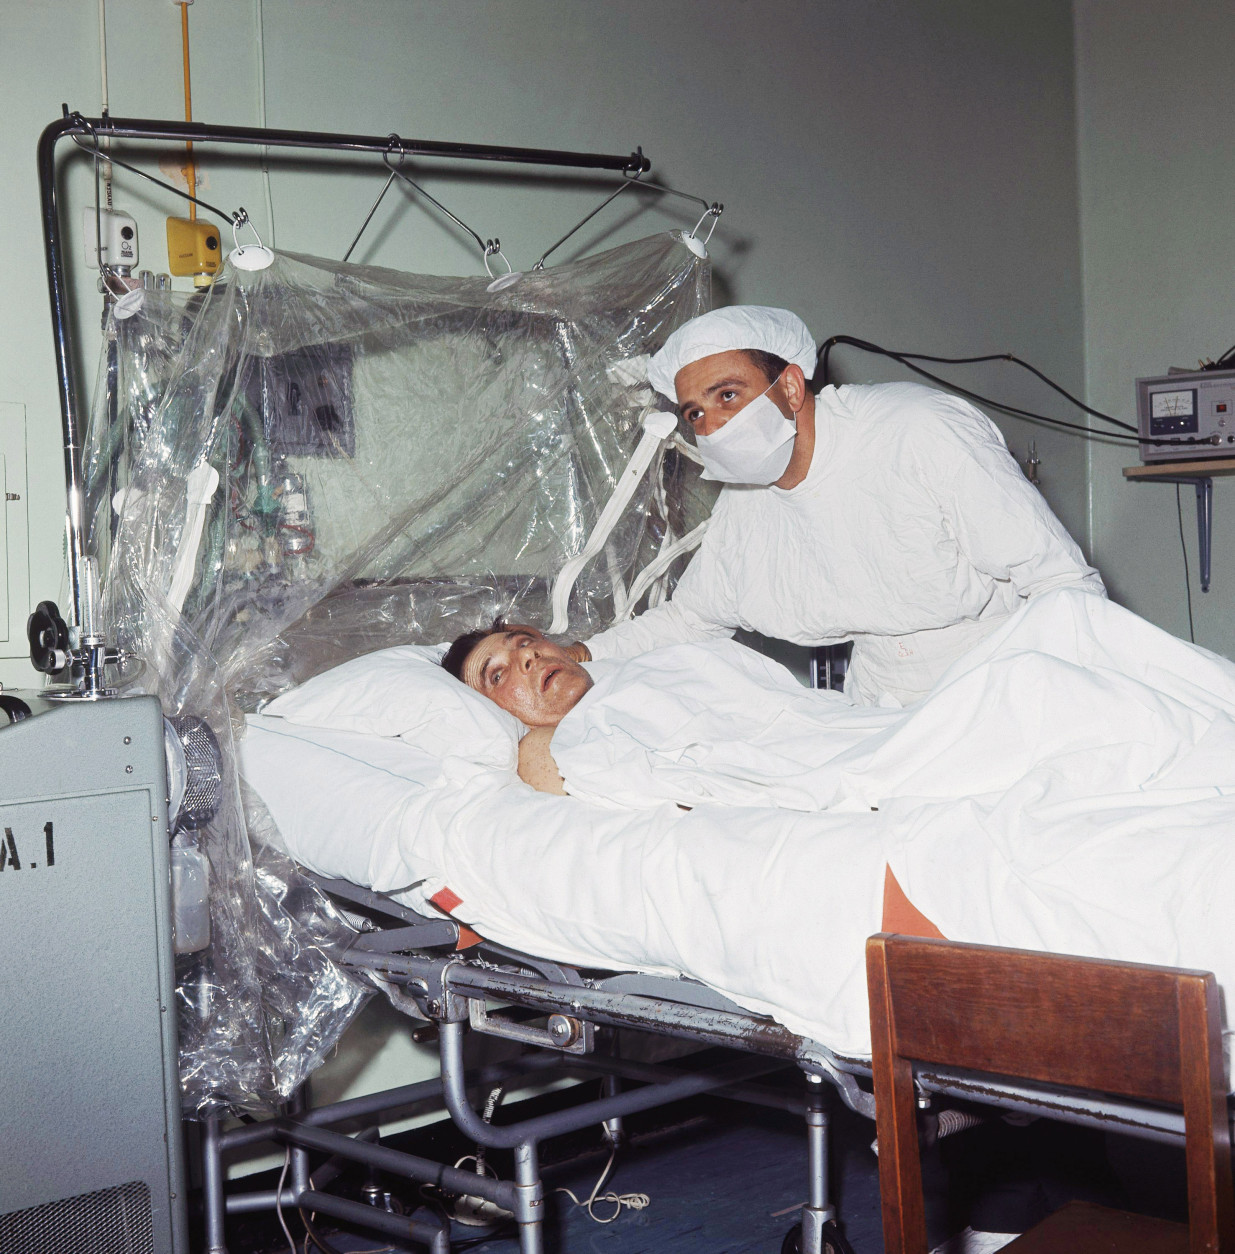 Heart transplant surgeon Dr. Christiaan Barnard is shown after performing the first heart transplant on patient Louis Washkansky on December 3, 1967 in Cape Town, South Africa.  Barnard headed a medical team that removed the heart of a 24-year-old woman who died in an auto accident and replaced the diseased heart of the dying 55-year-old businessman Washkansky. (AP Photo)